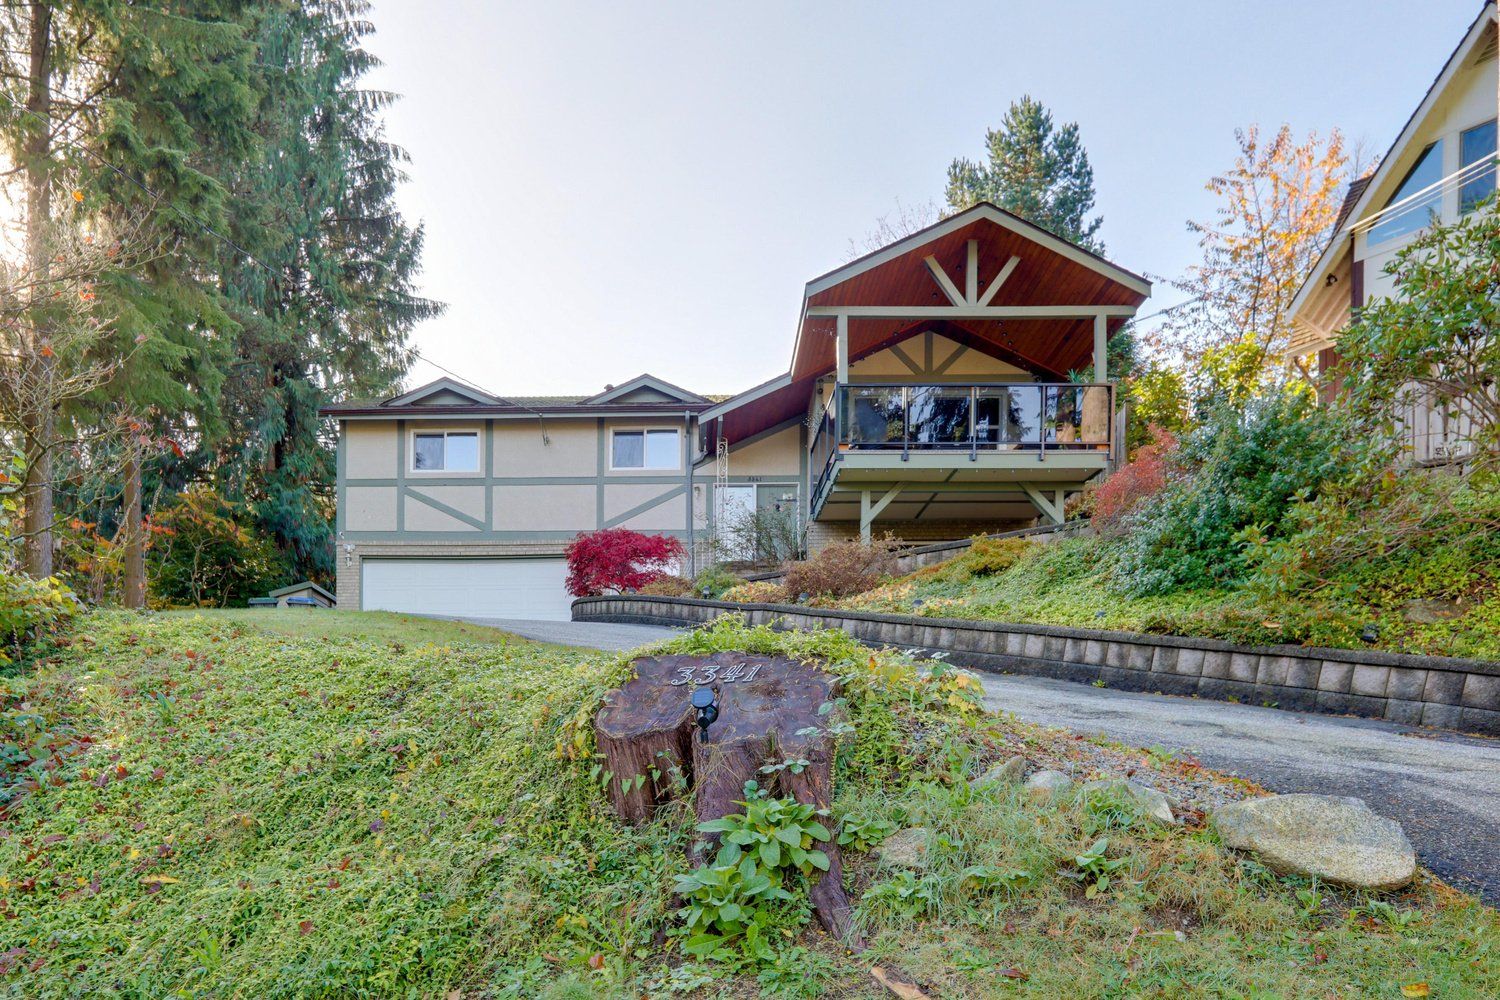 Main Photo: 3341 VIEWMOUNT DRIVE in Port Moody: Port Moody Centre House for sale : MLS®# R2416193